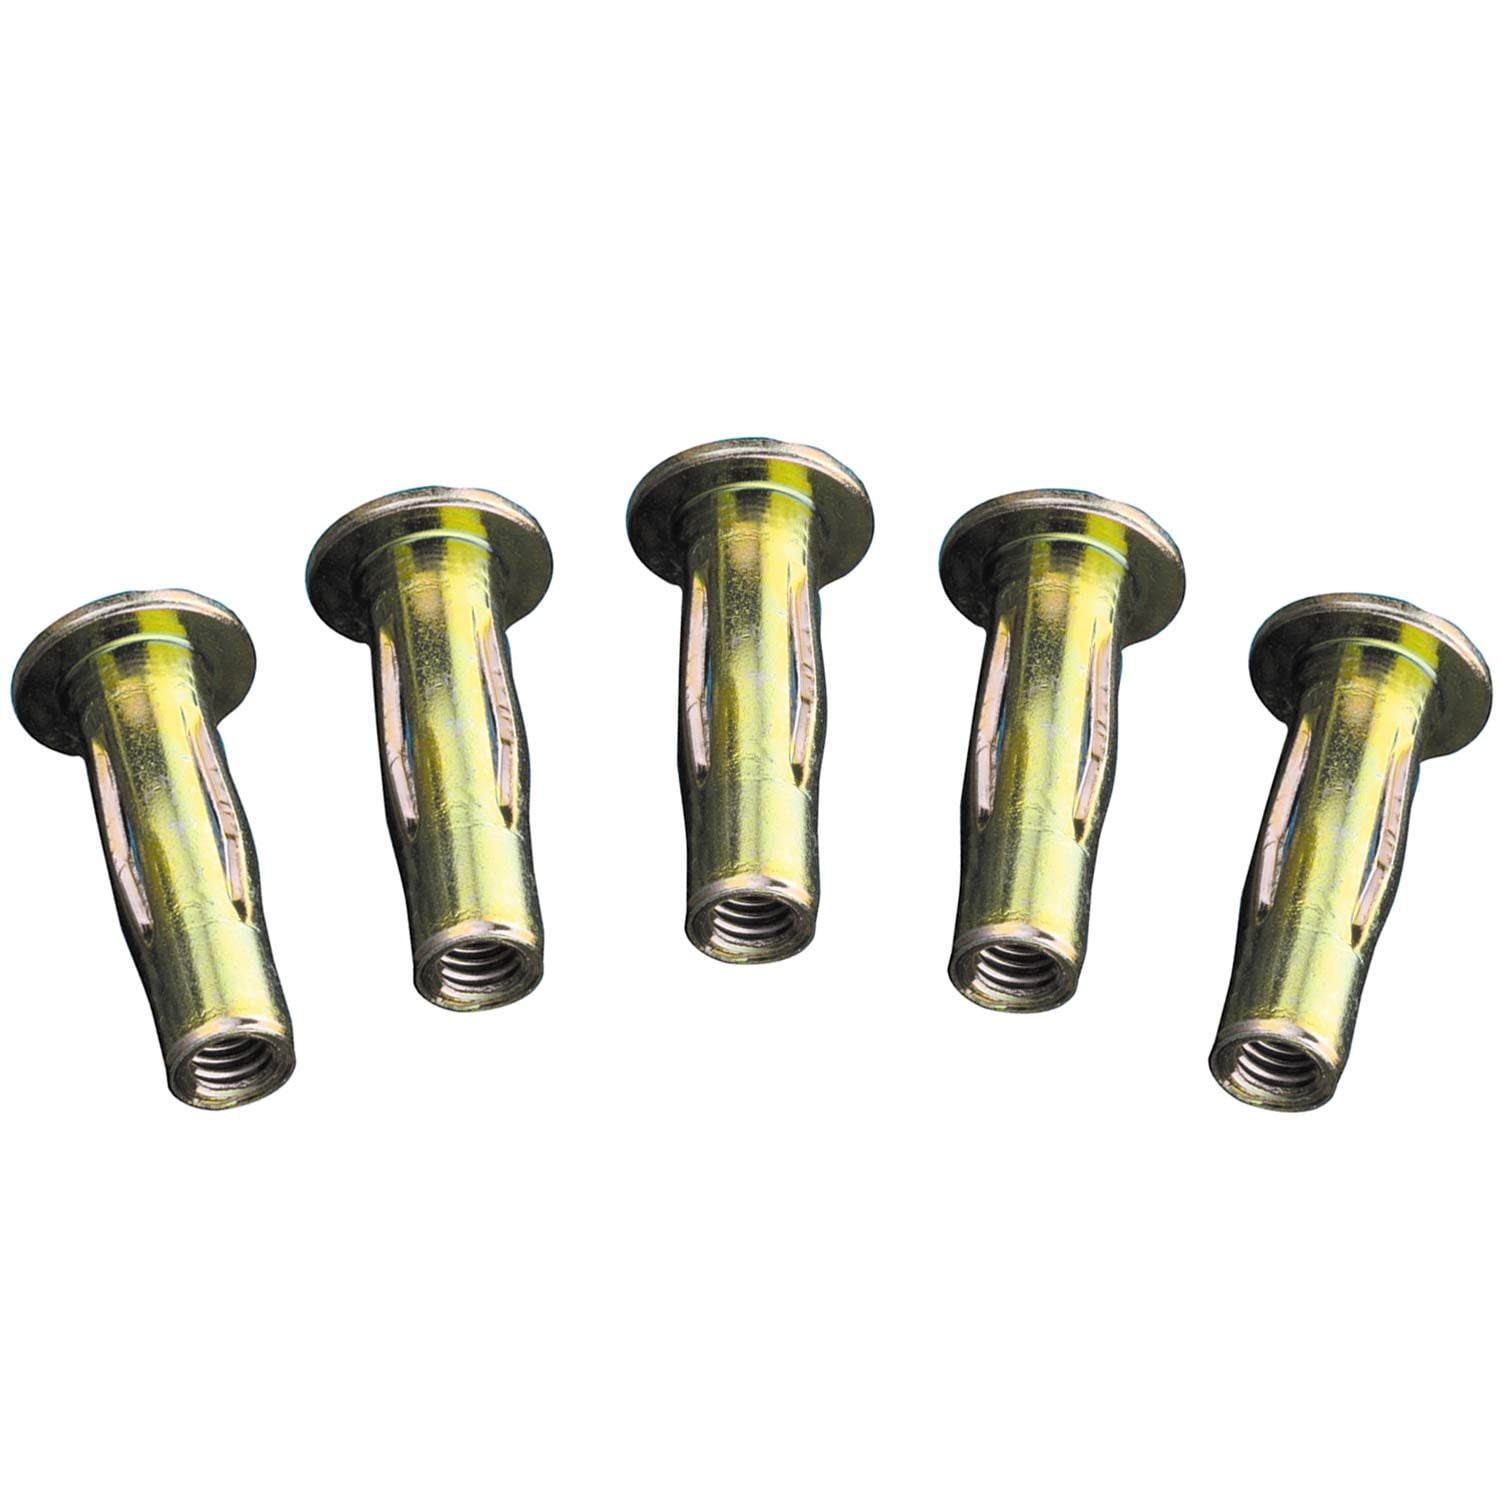 Fixed Rivet Nut W/ Mounting Rivets 2-Pack Anchor Nut 1/4-20 T Nut 